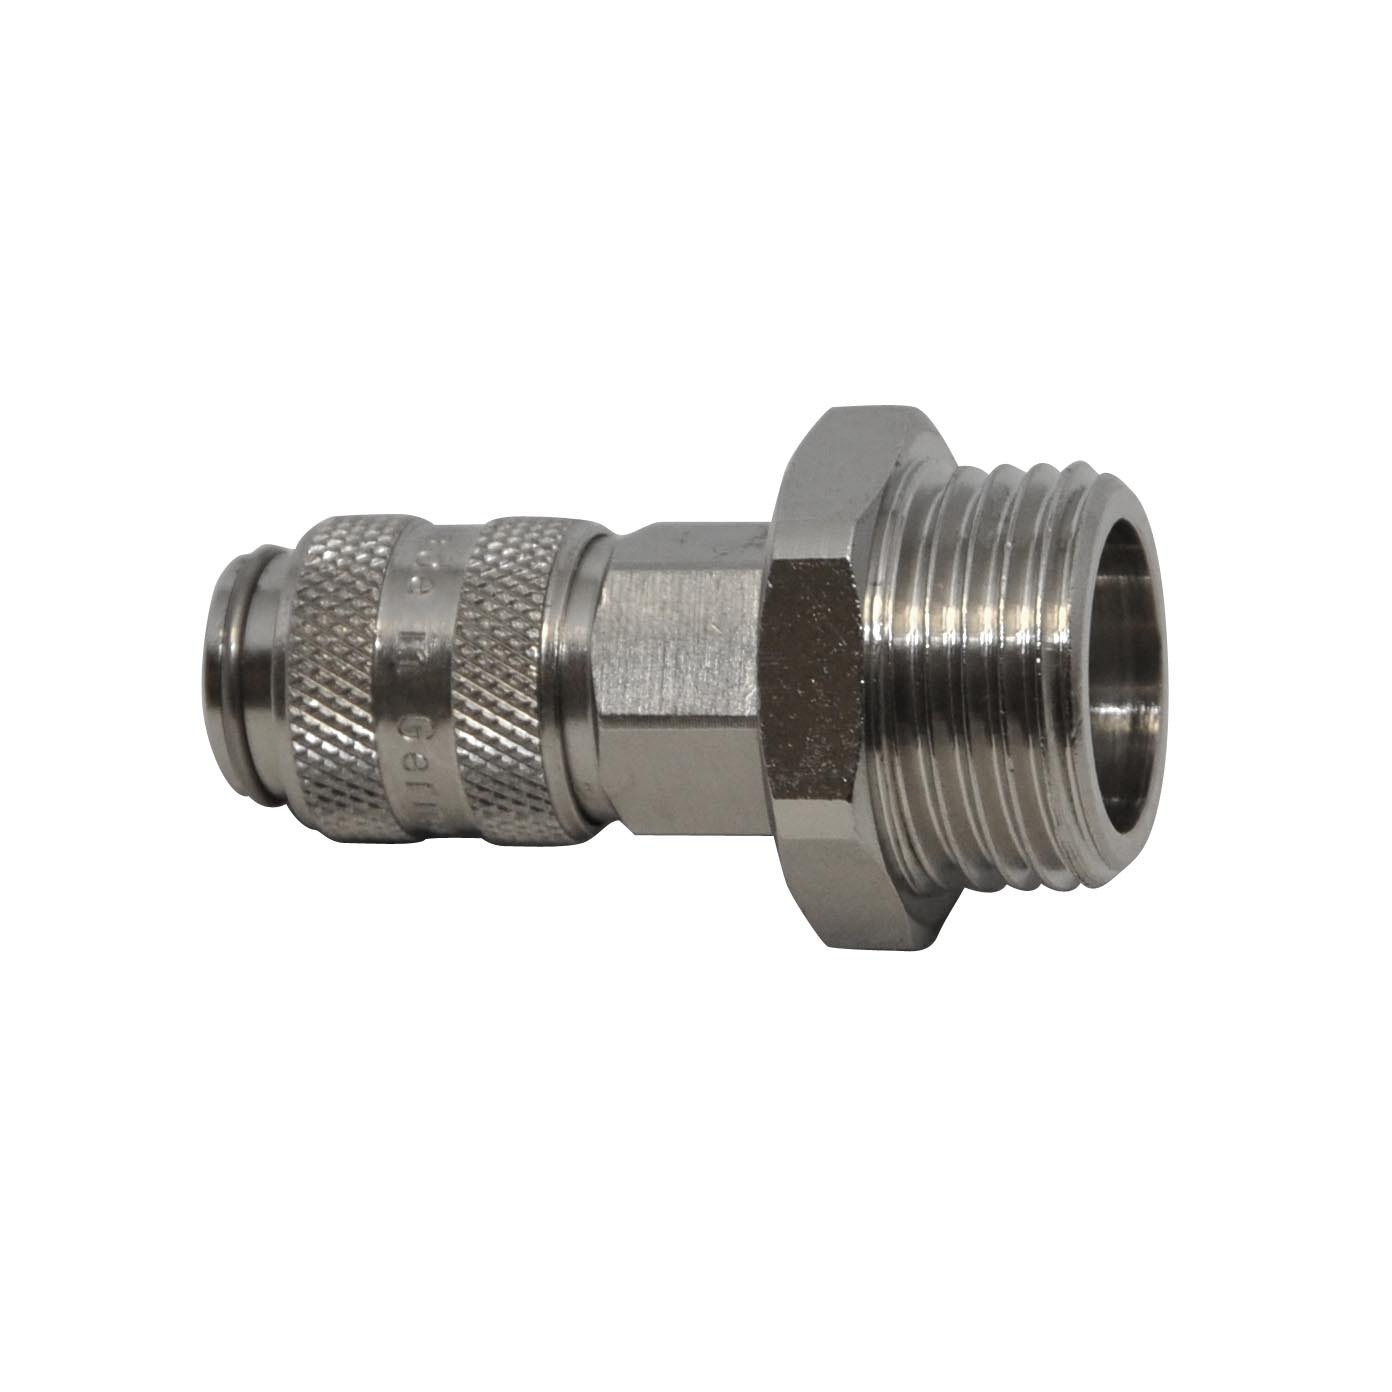 Adapter S21C to 1/2" ET